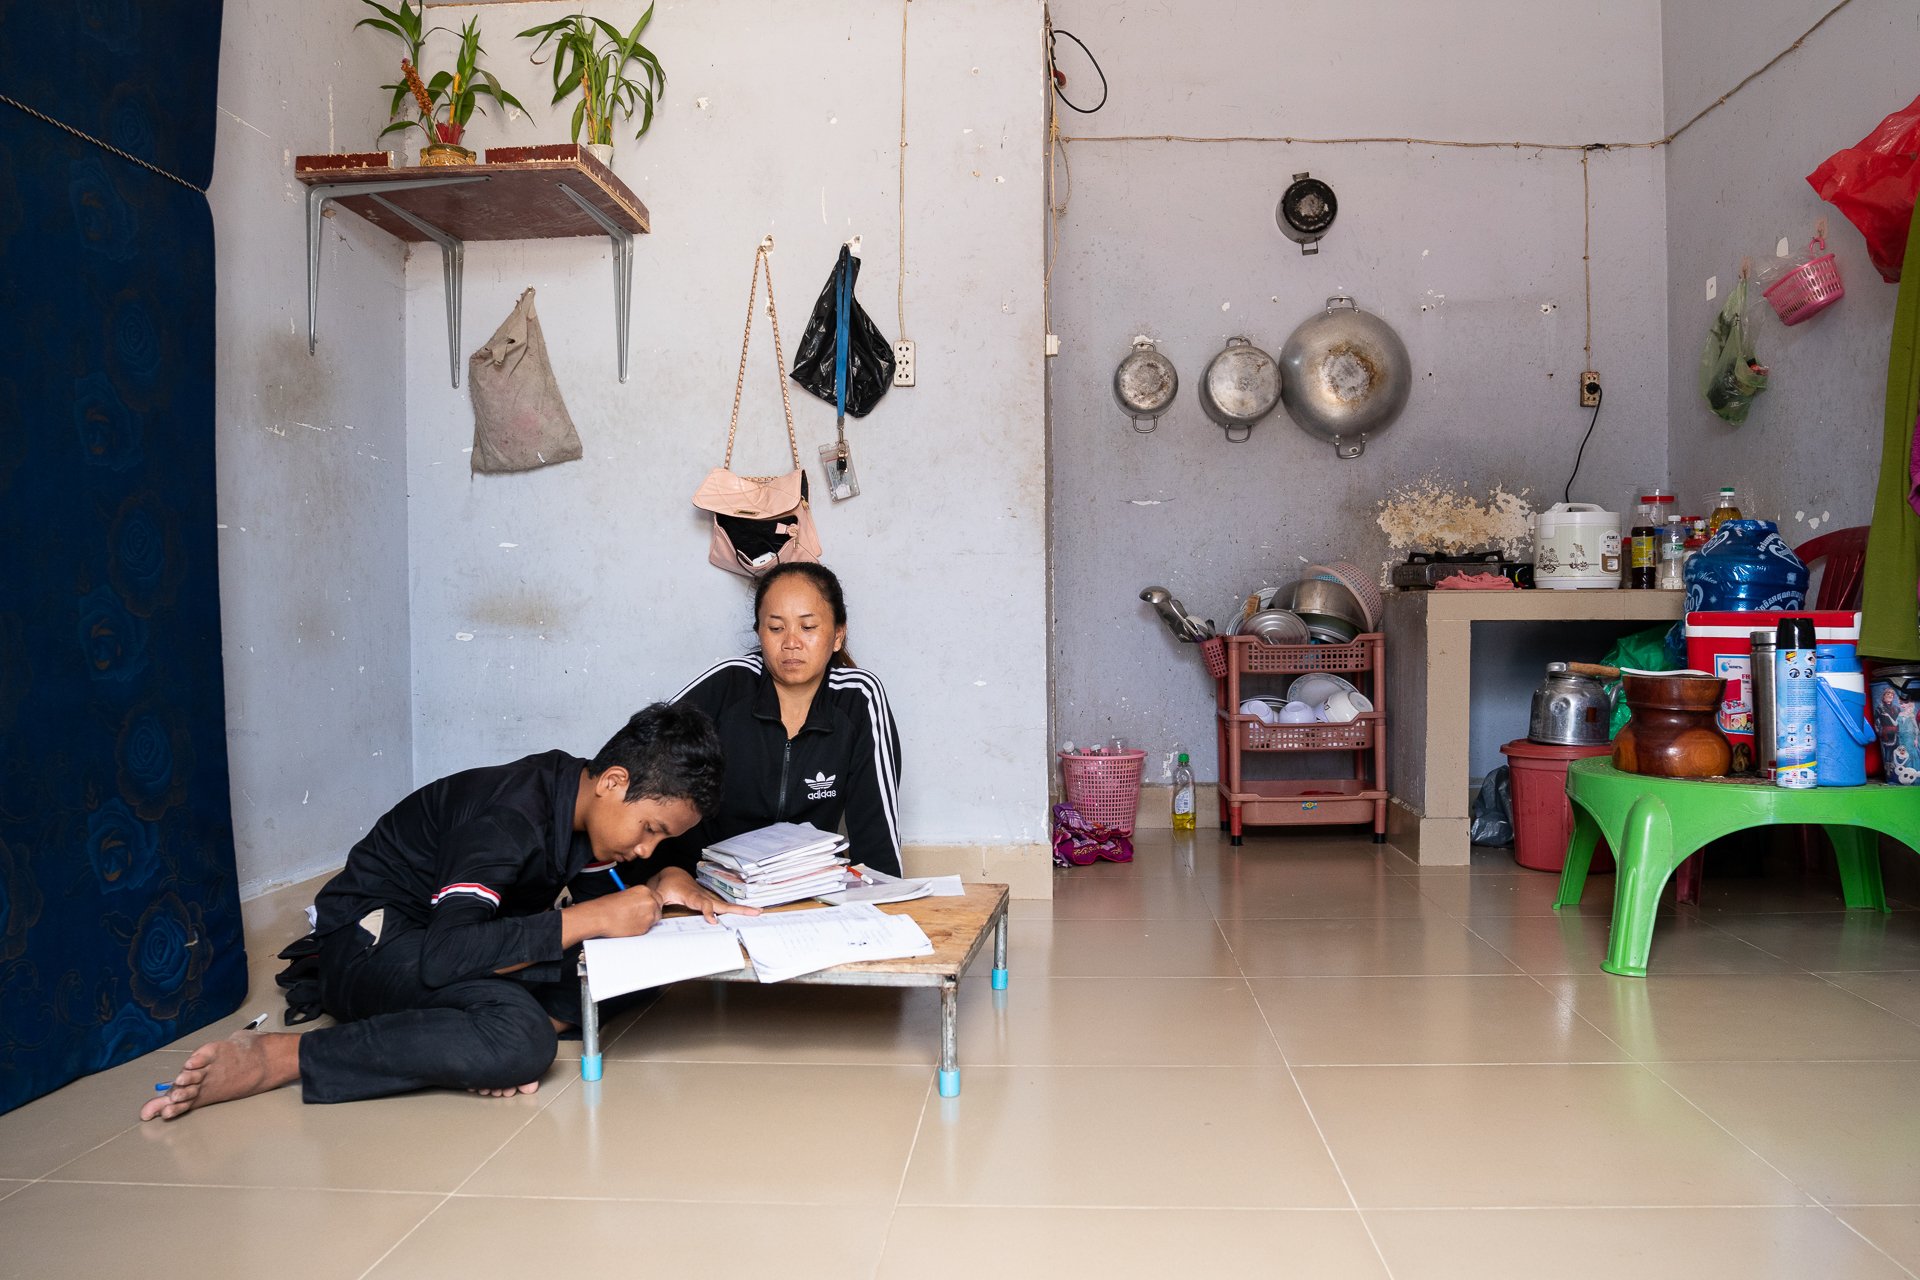 Sok Voeun doing homework with her son at home